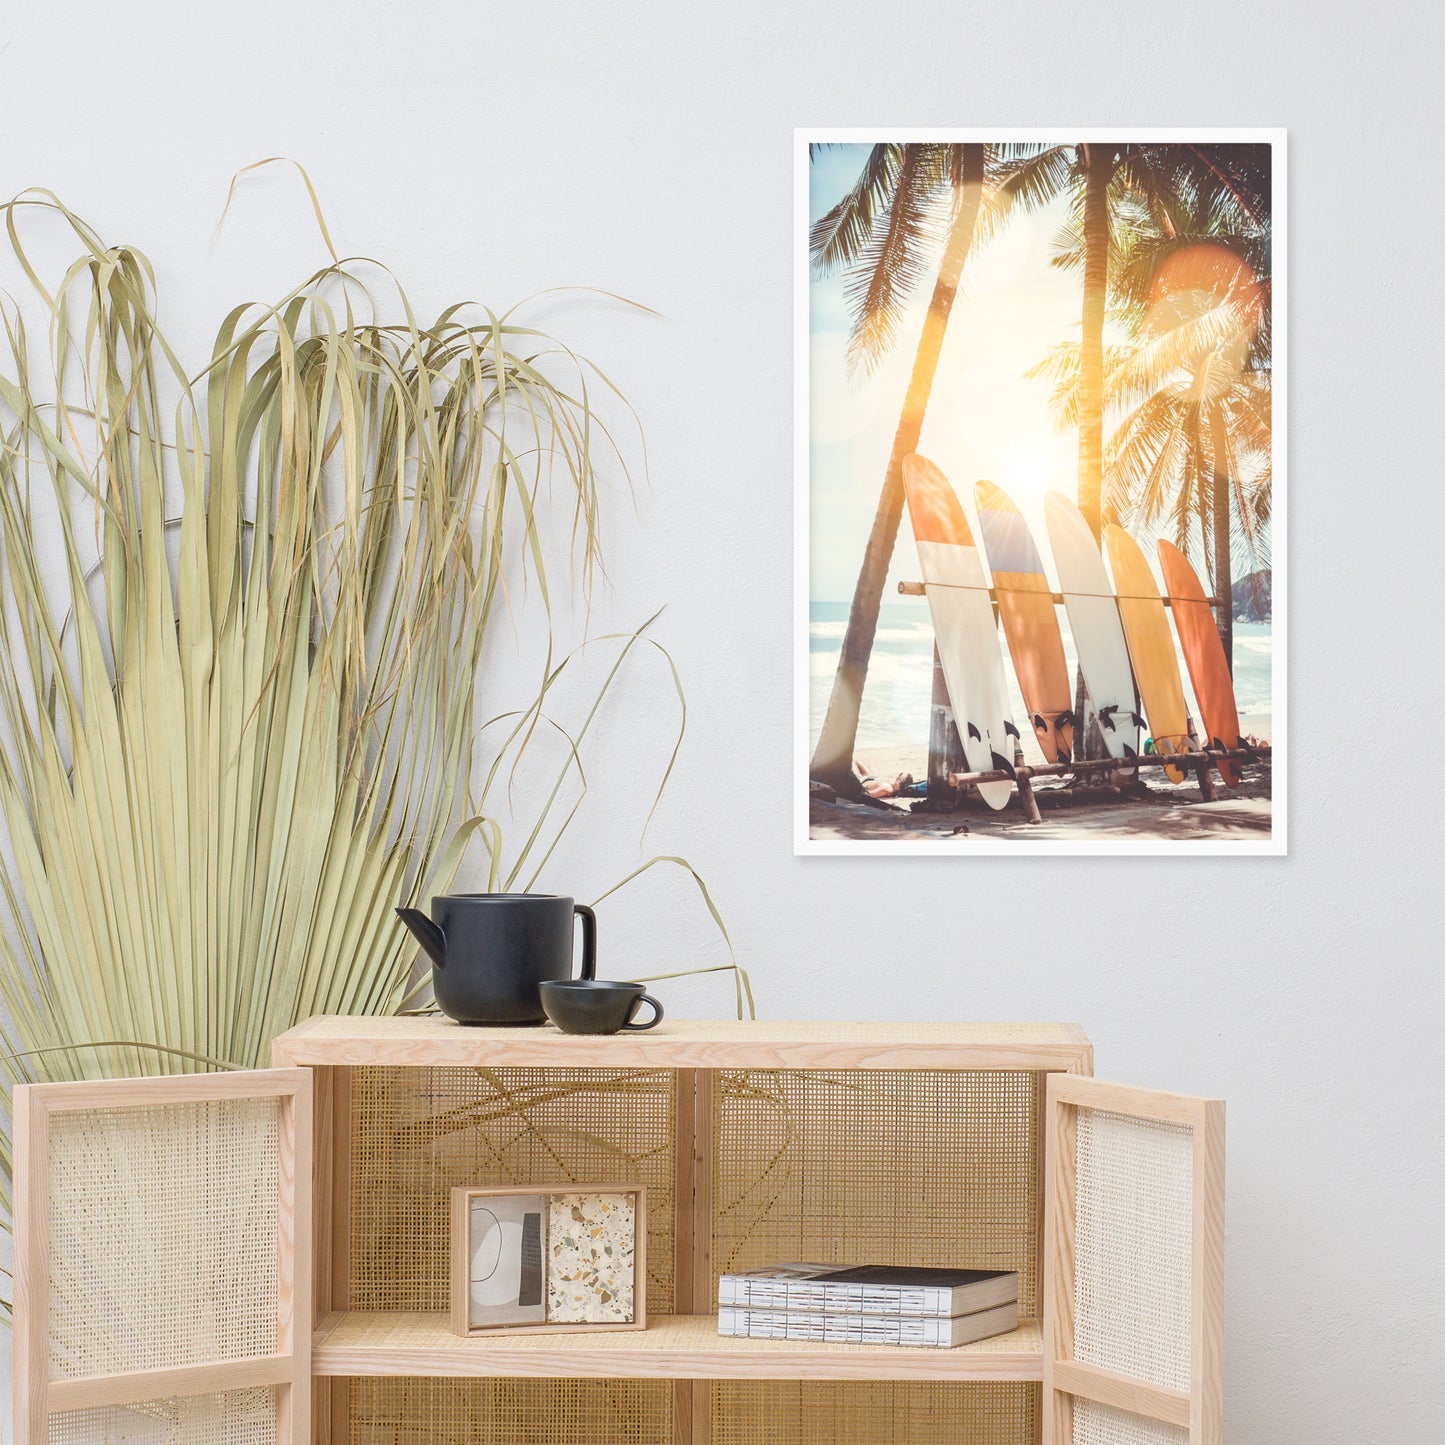 Surfer's Tropical Dreamscape Lifestyle Photograph Framed Wall Art Print